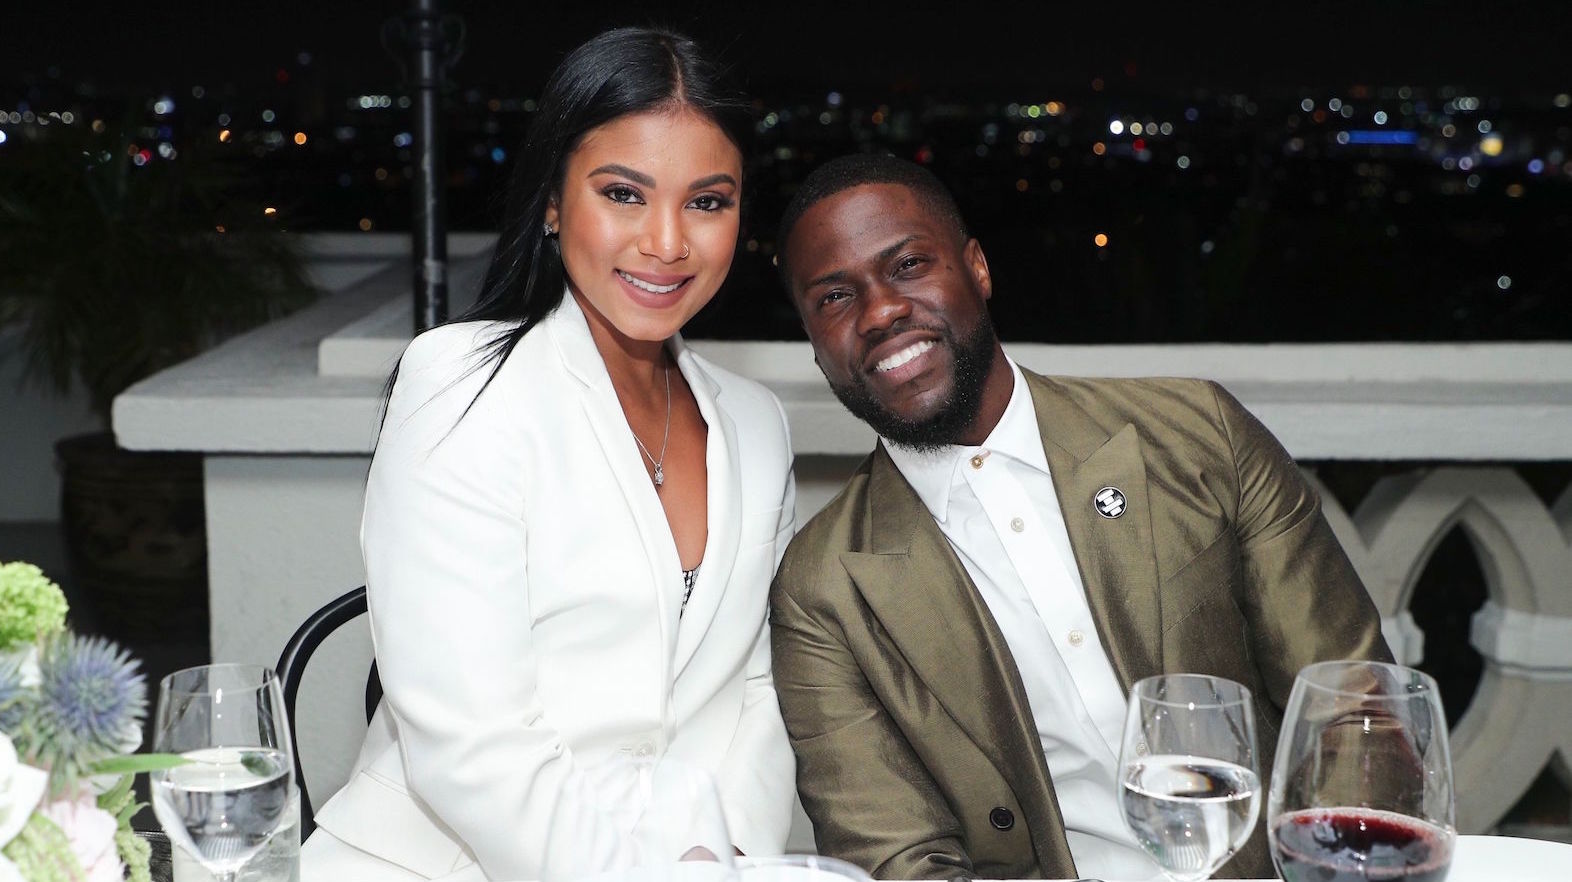 Kevin Harts Wife Eniko Gives Update on His Condition After Car Crash